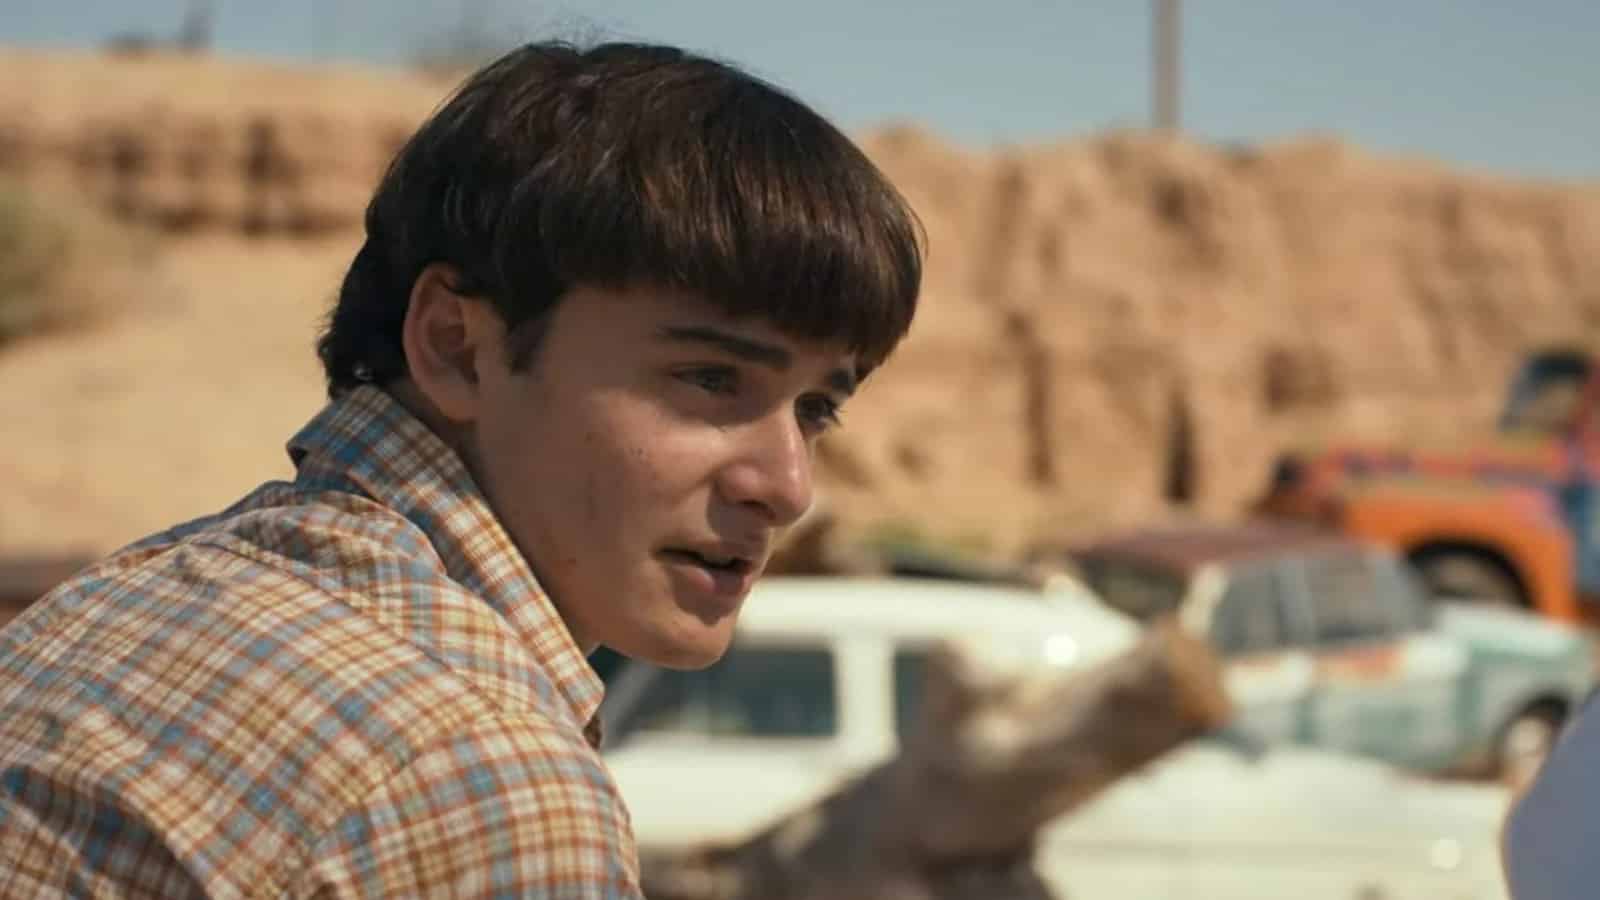 will Byers sits in the desert in stranger things